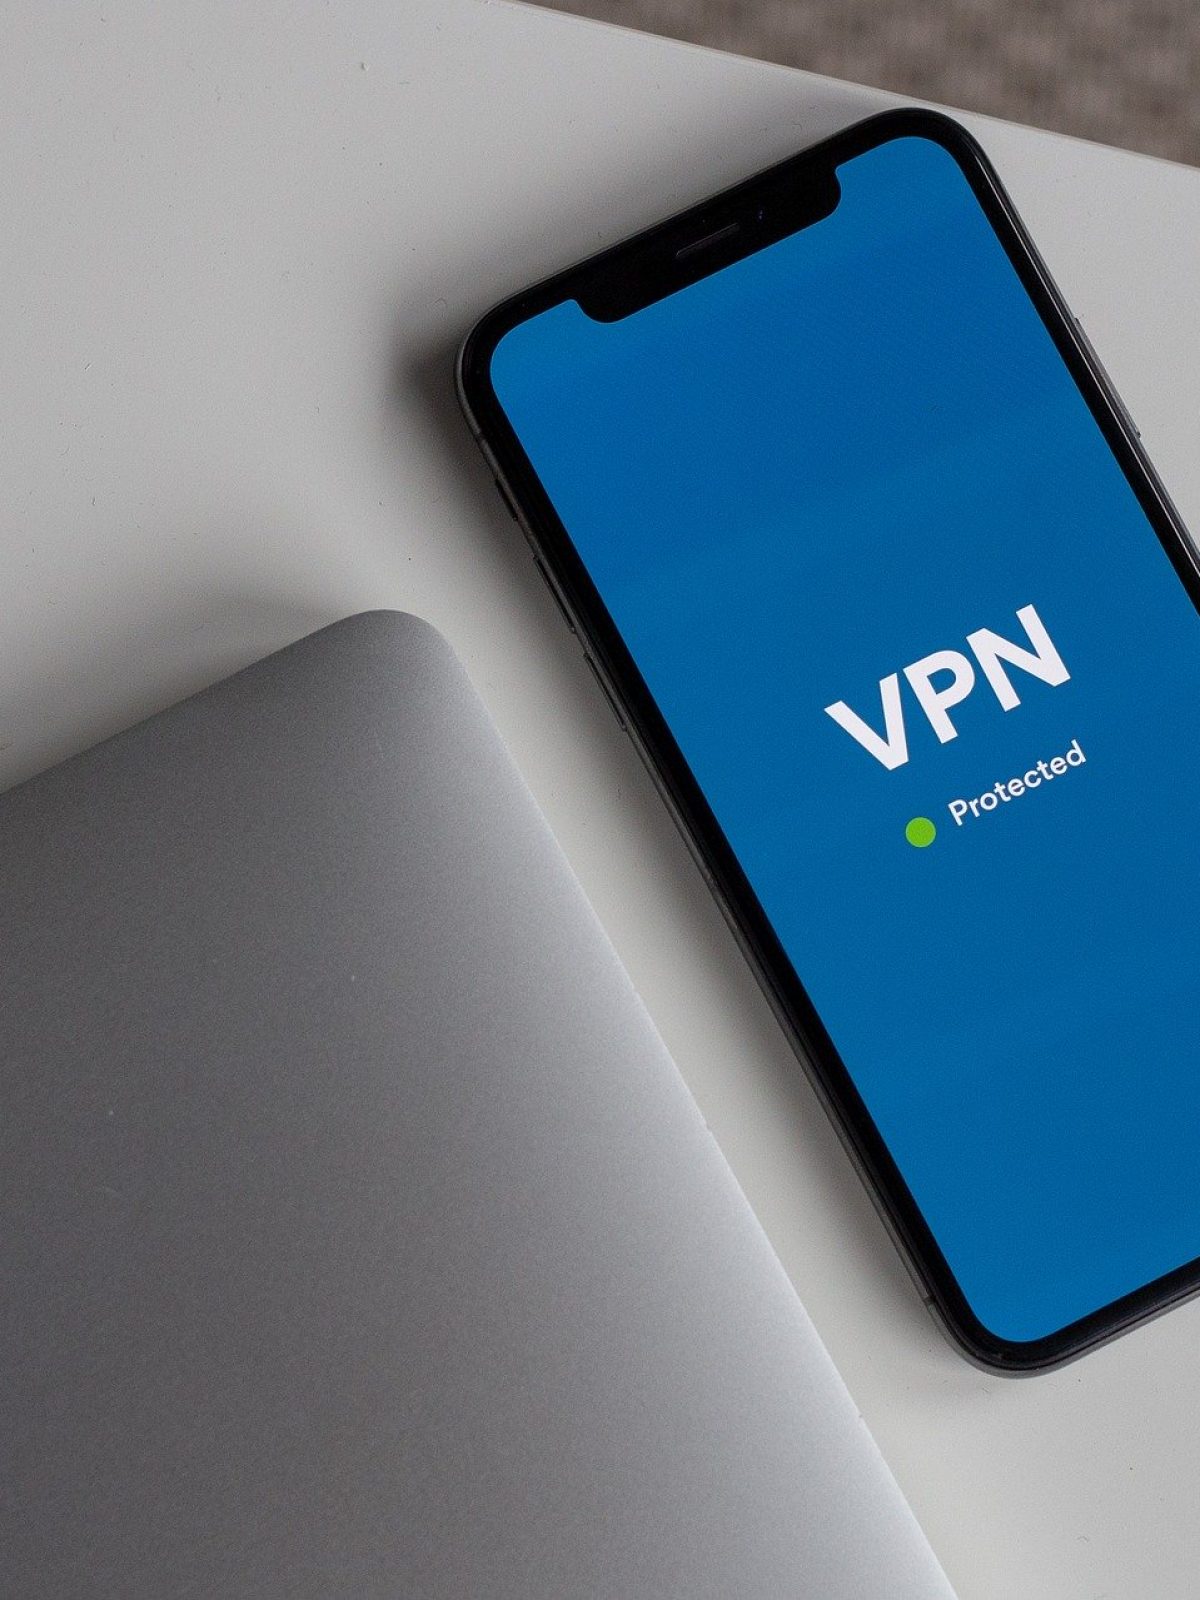 vpn-for-home-security-4086523-1920